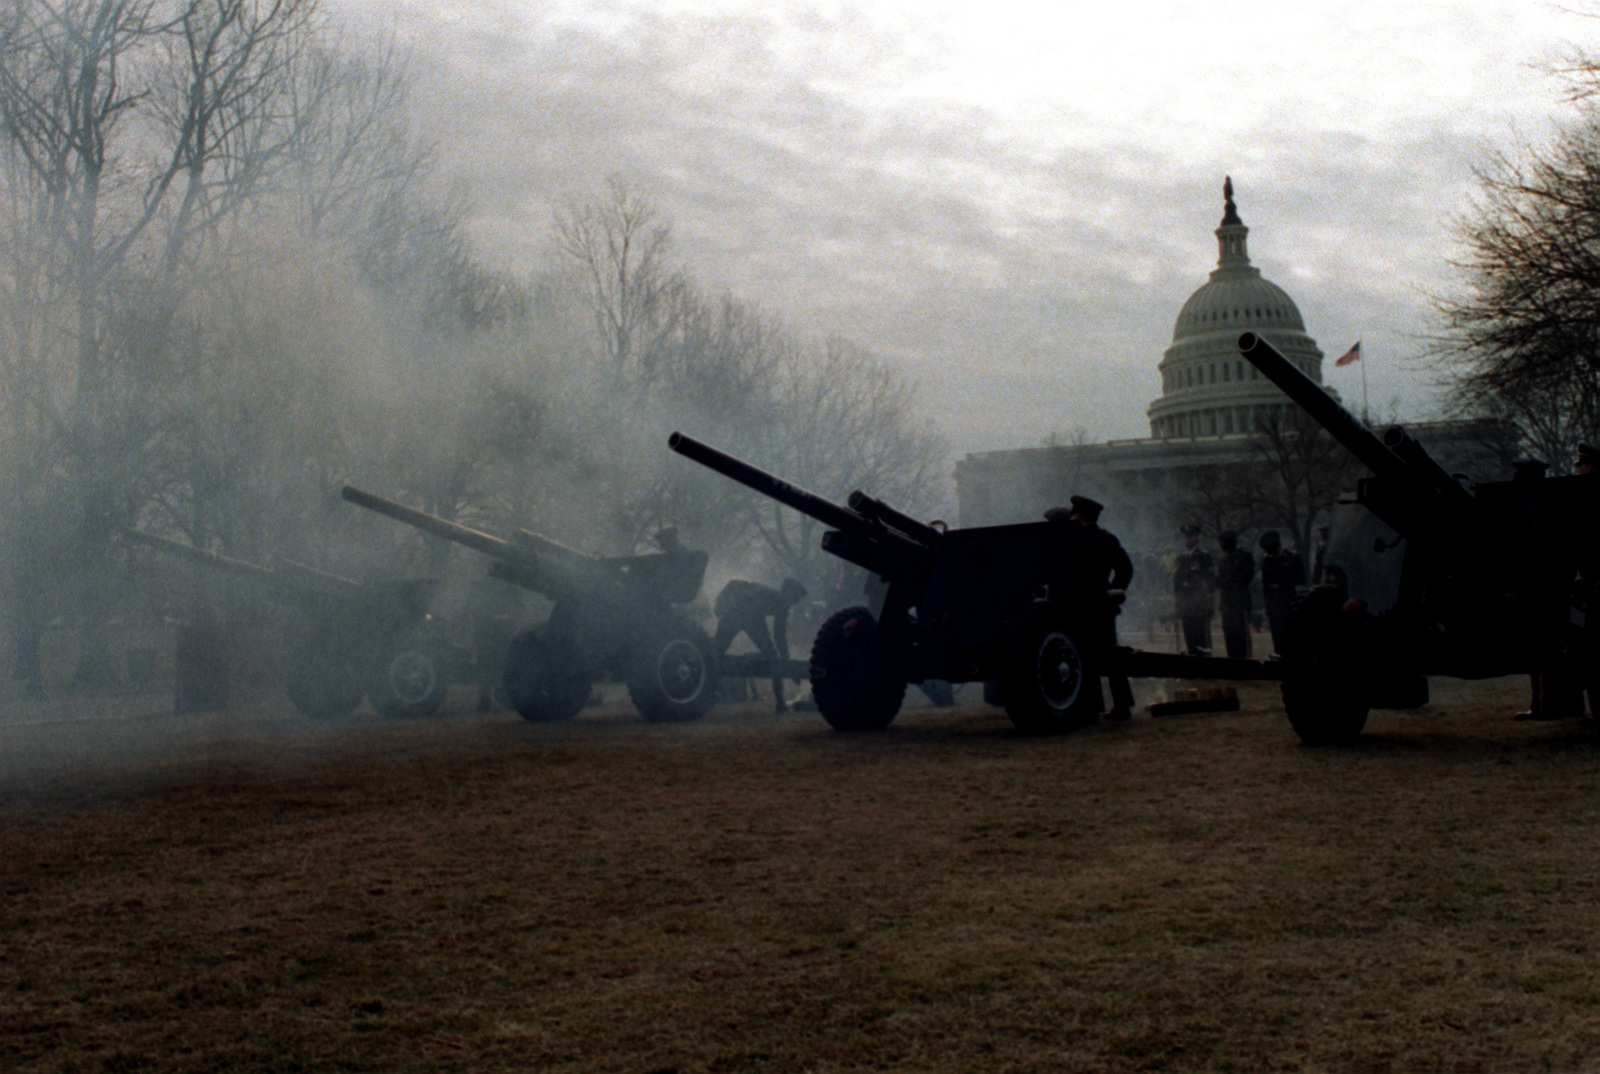 An Army 105mm howitzer artillery battery is located on the lawn behind ...